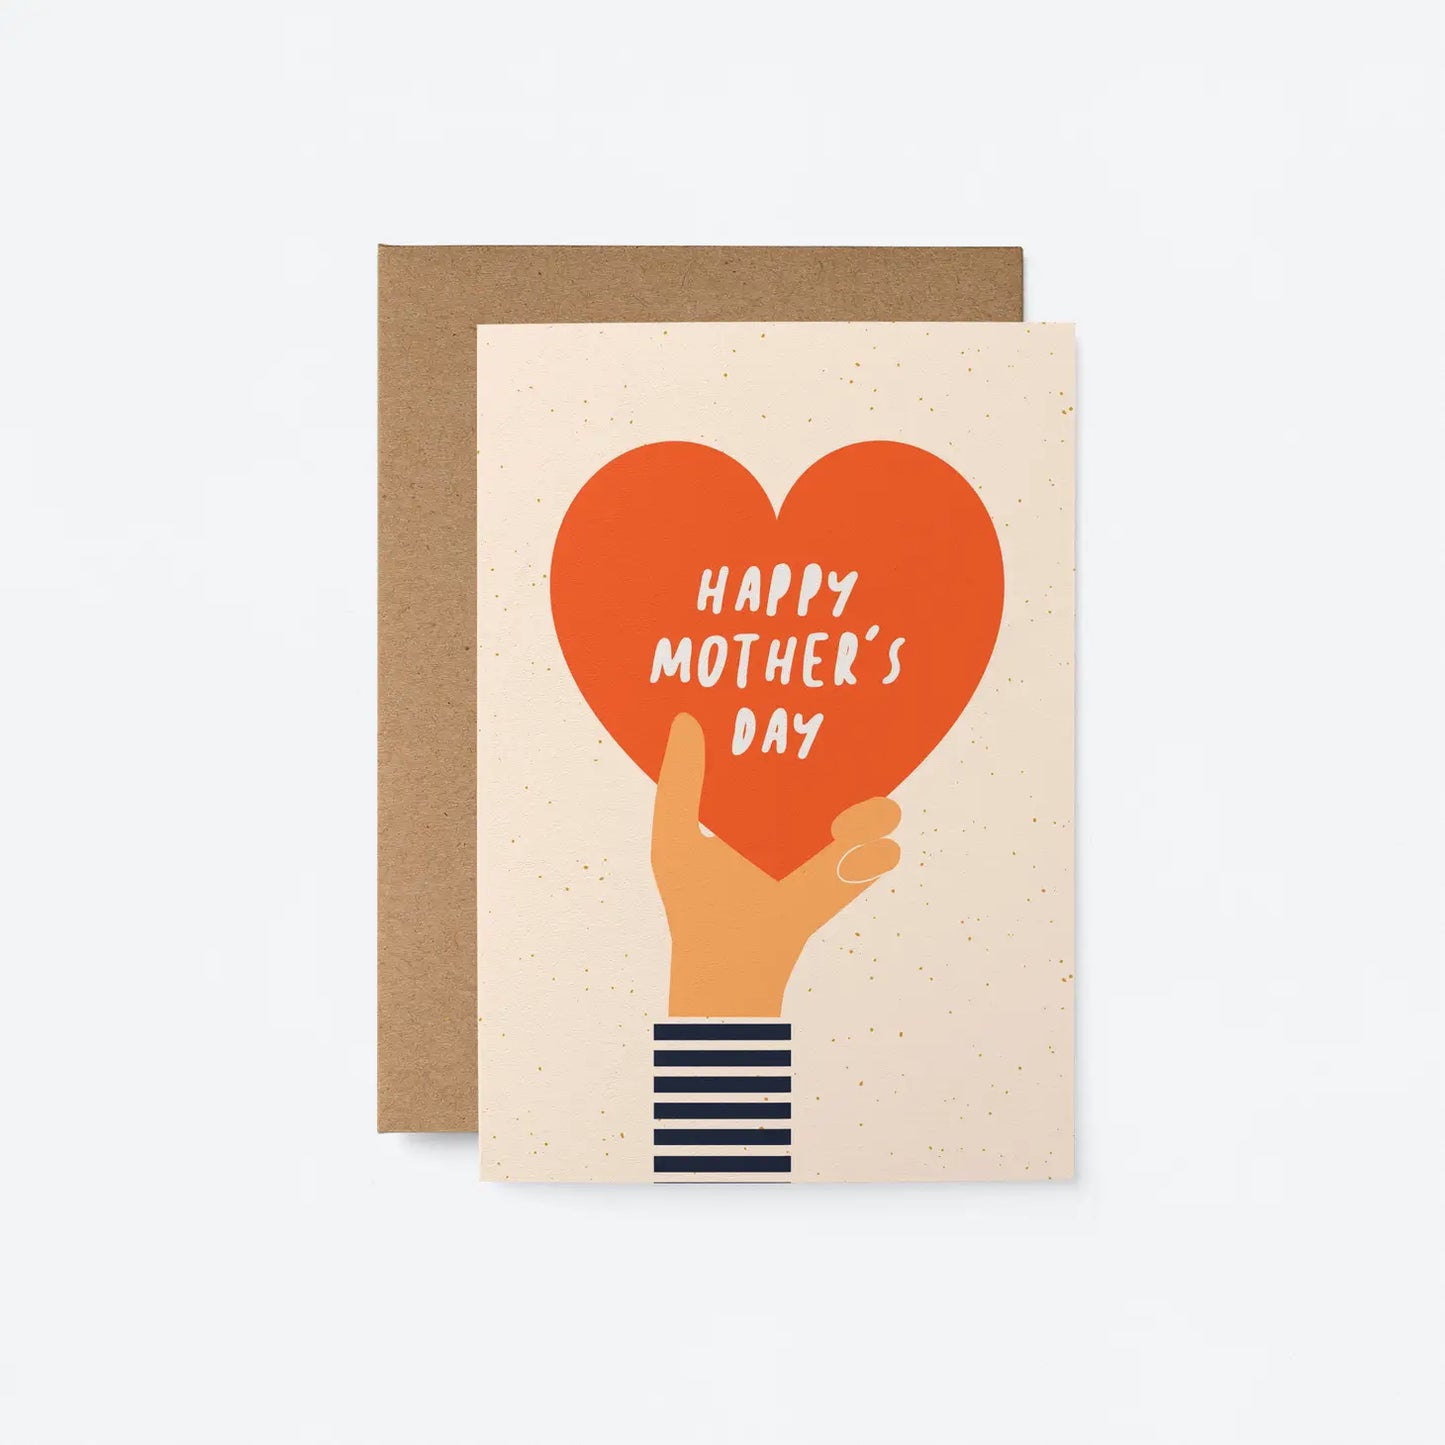 Happy Mother’s Day heart card